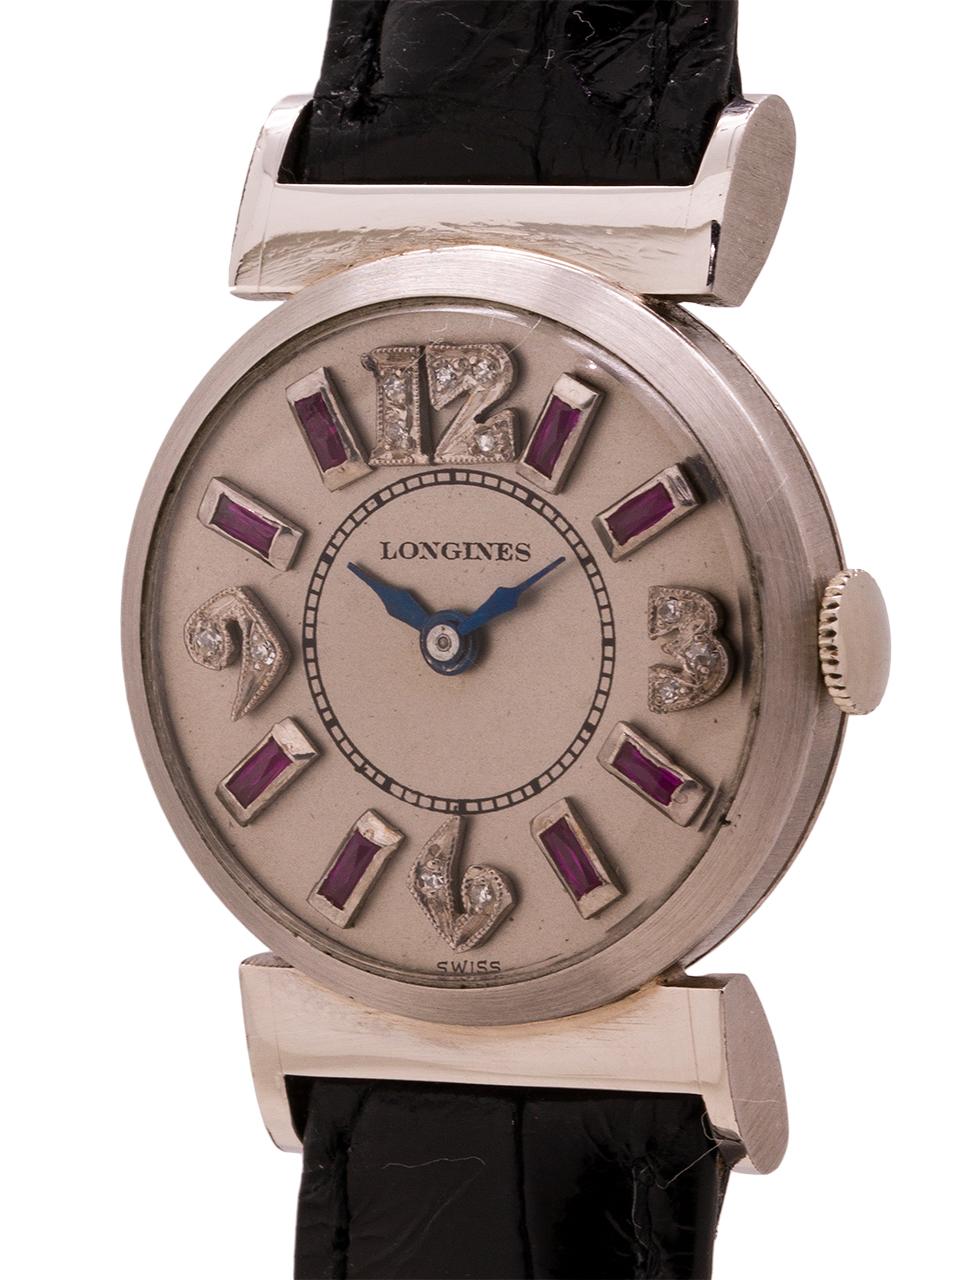 Longines Platinum Diamond and Ruby Set Ladies Watch, circa 1950s In Excellent Condition For Sale In West Hollywood, CA